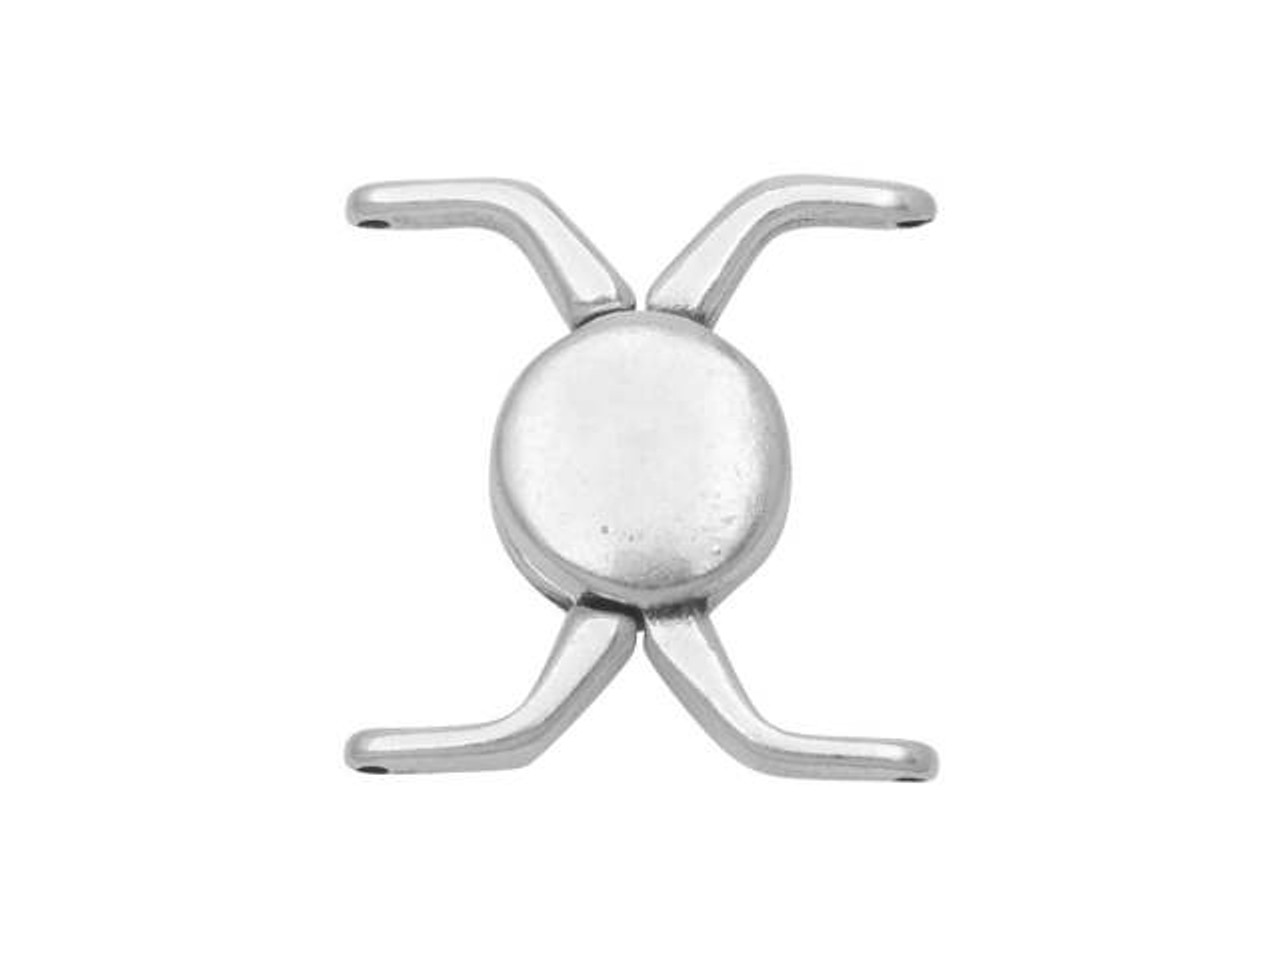 Cymbal Magnetic Clasps for 11/0 Delica & Round Beads, Souda II, Round 15.5x17.5mm, Antiqued Silver Plated (1 Set)